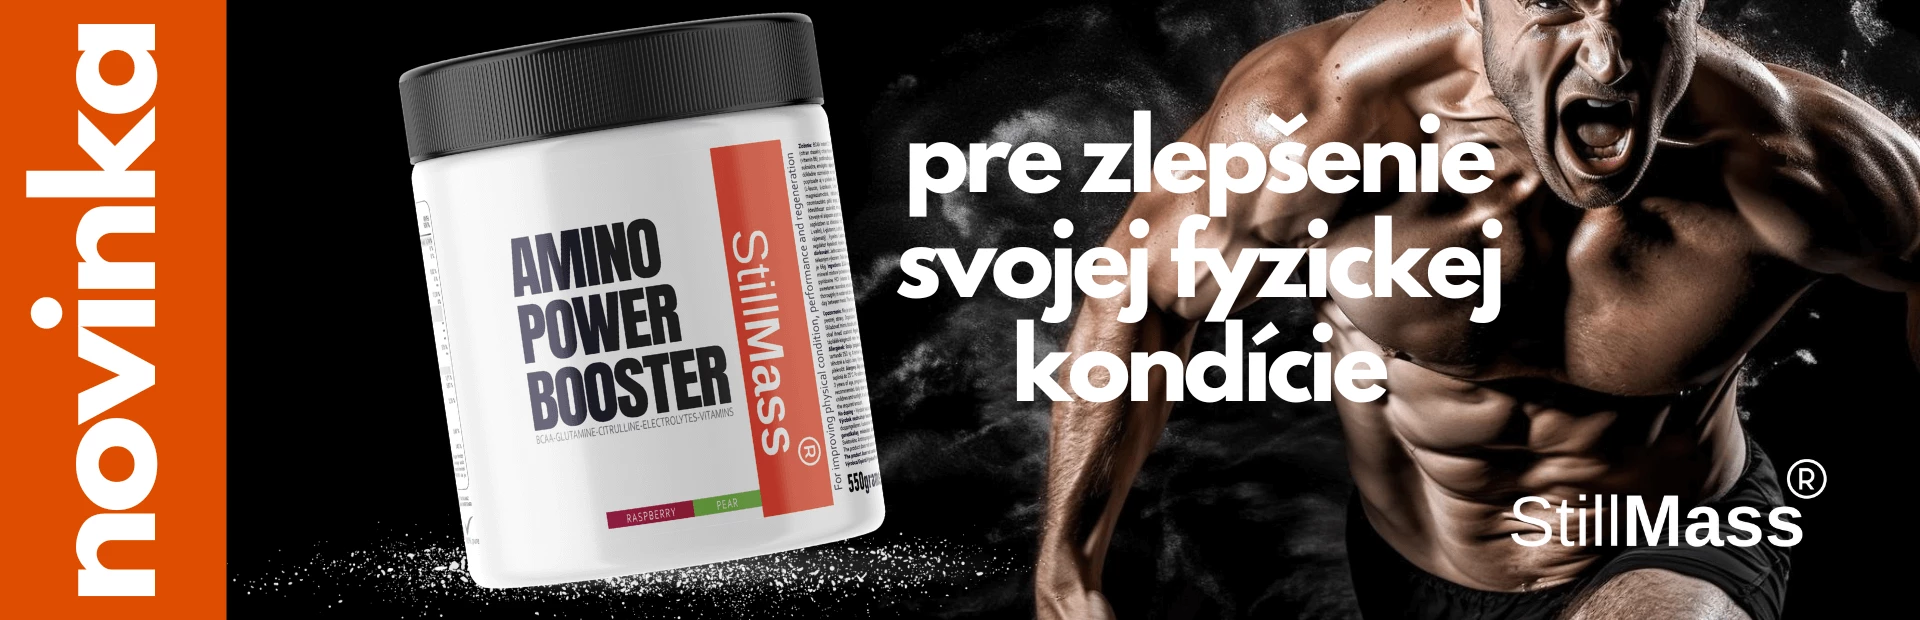 amino power booster